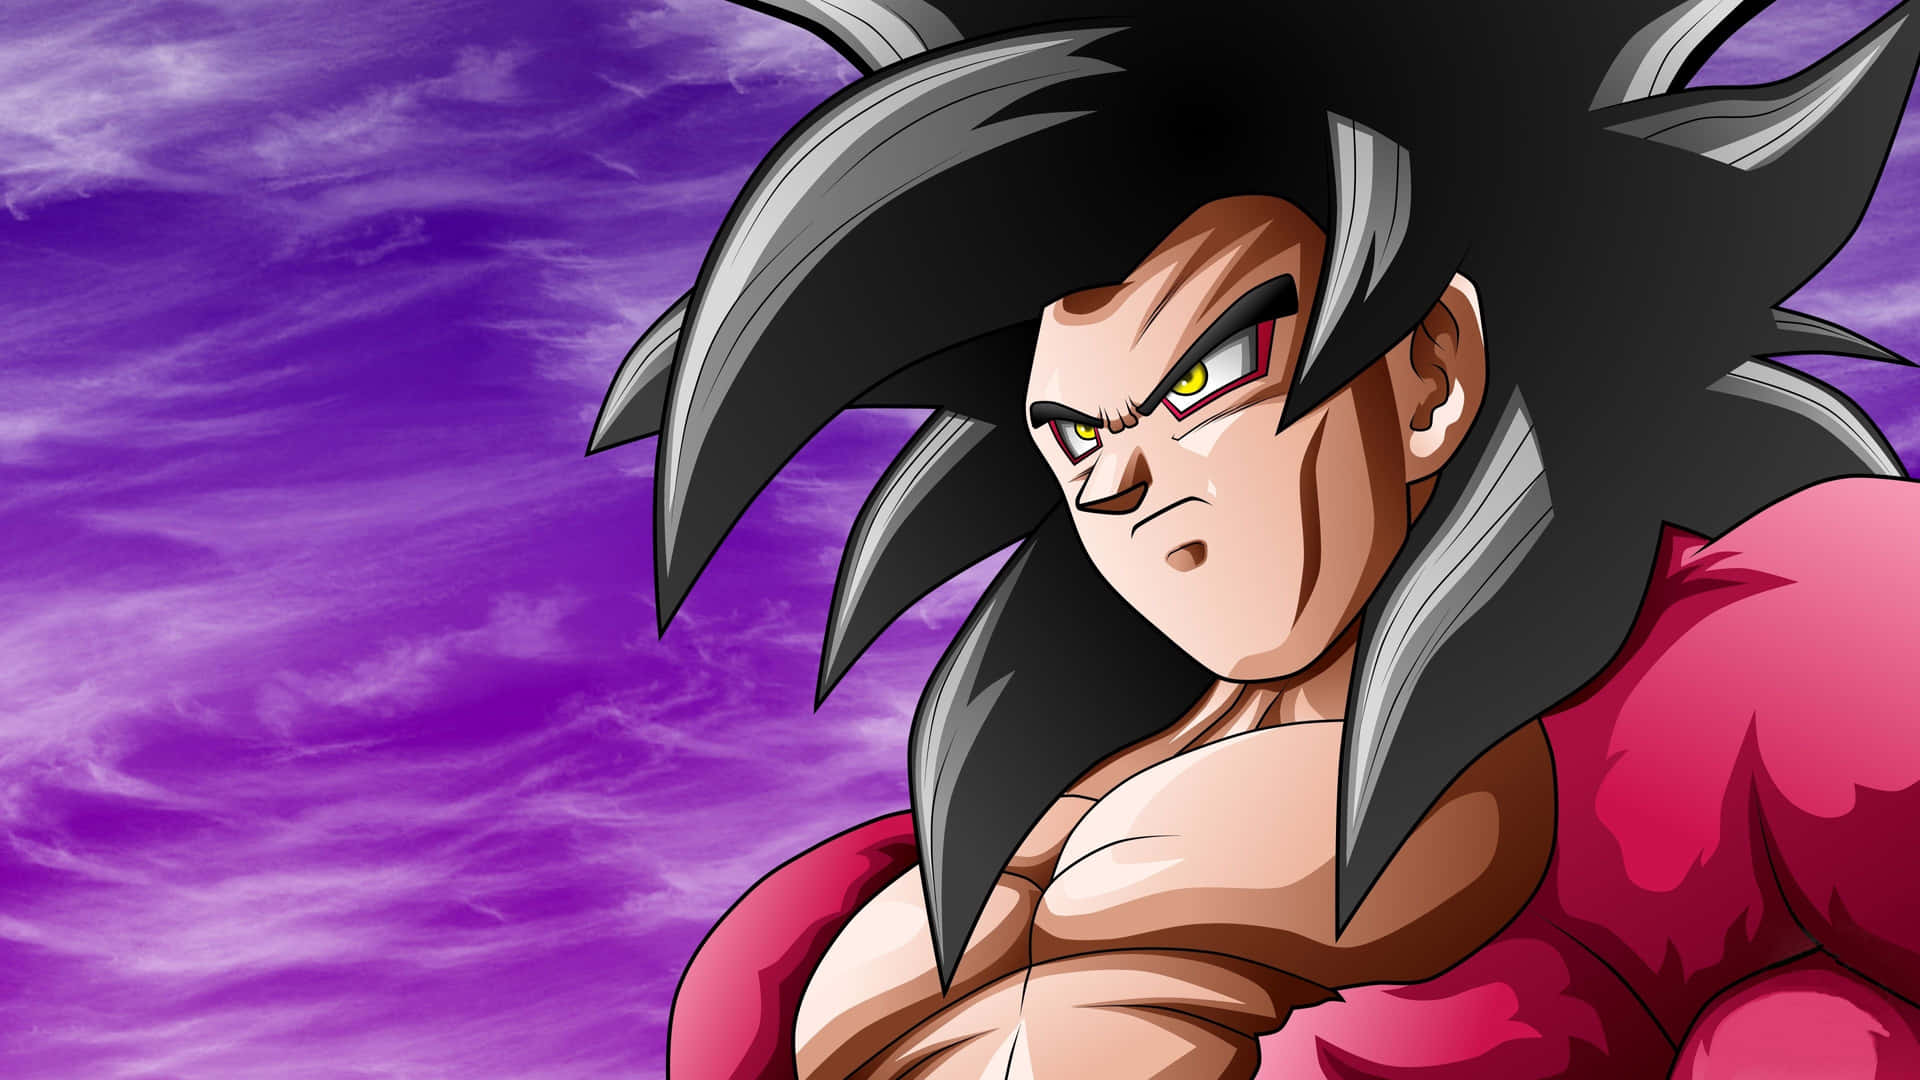 Dragon Ball Gt Wallpapers - Top Free Dragon Ball Gt Backgrounds